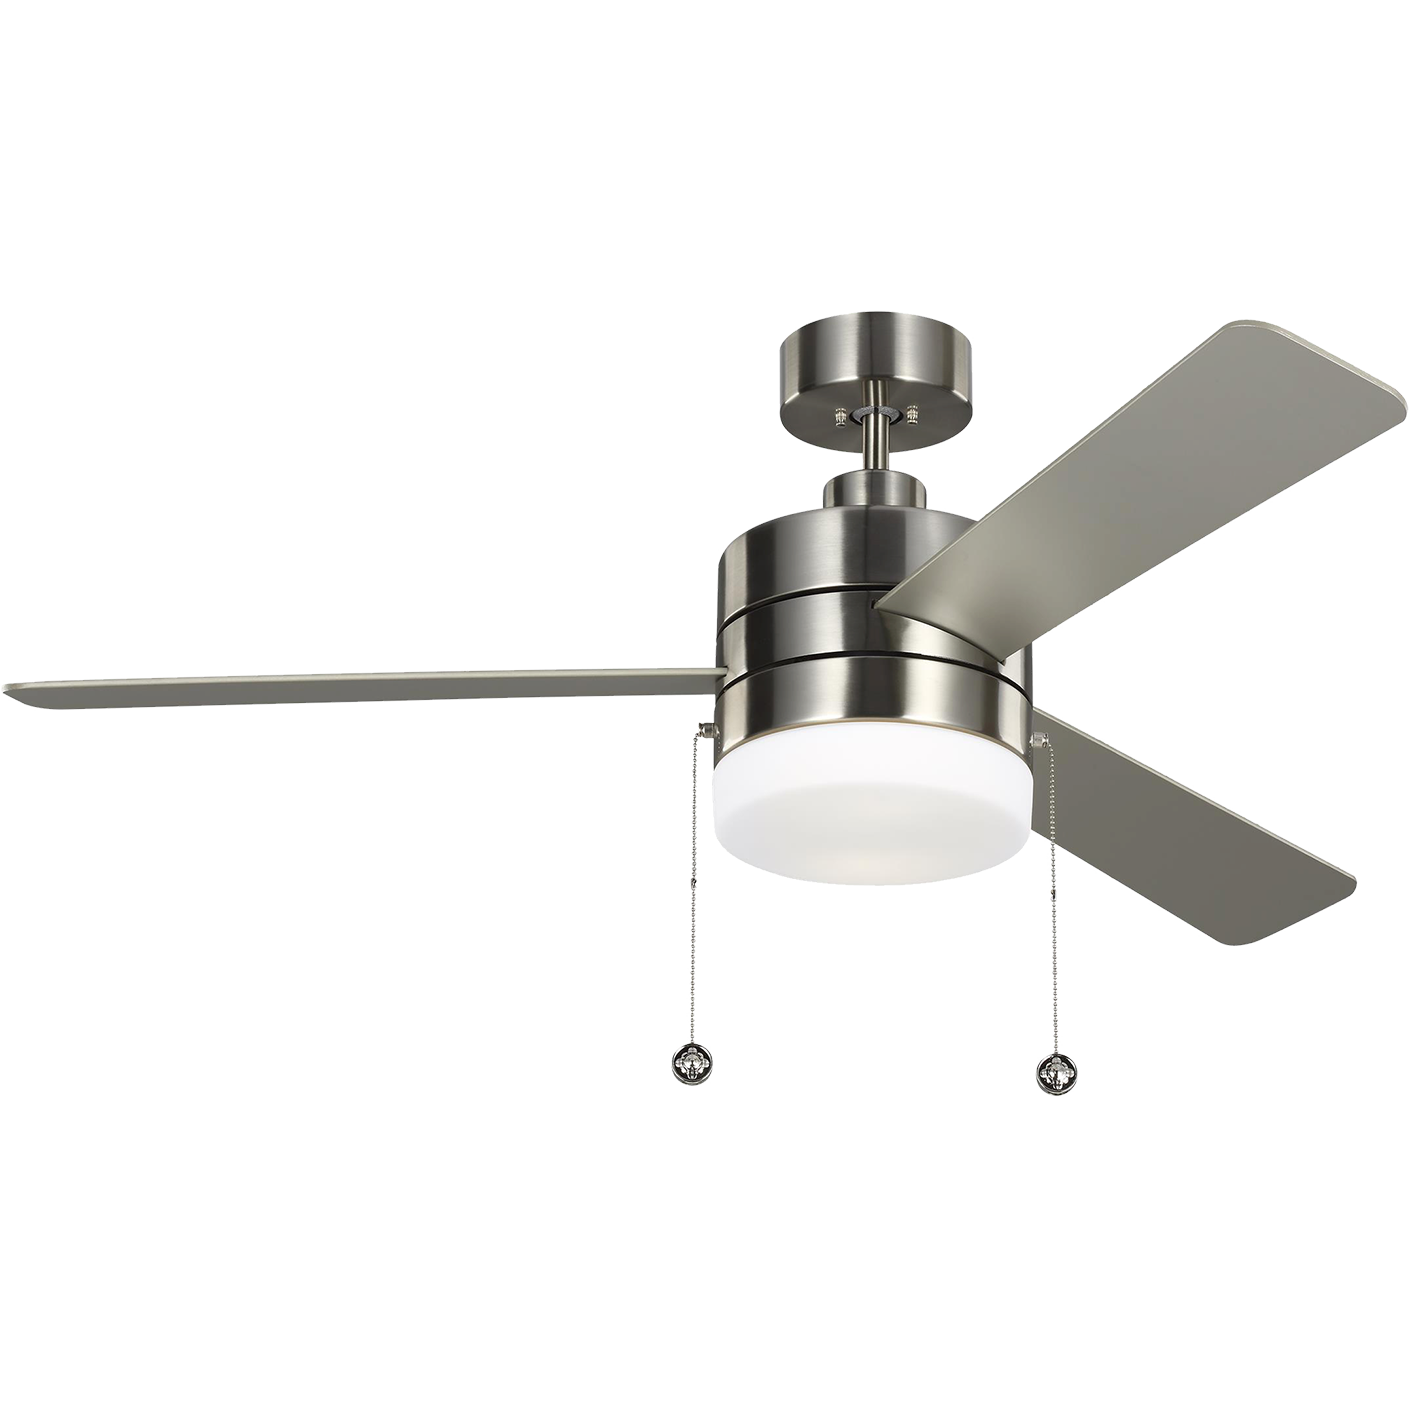 Syrus 52" LED Ceiling Fan